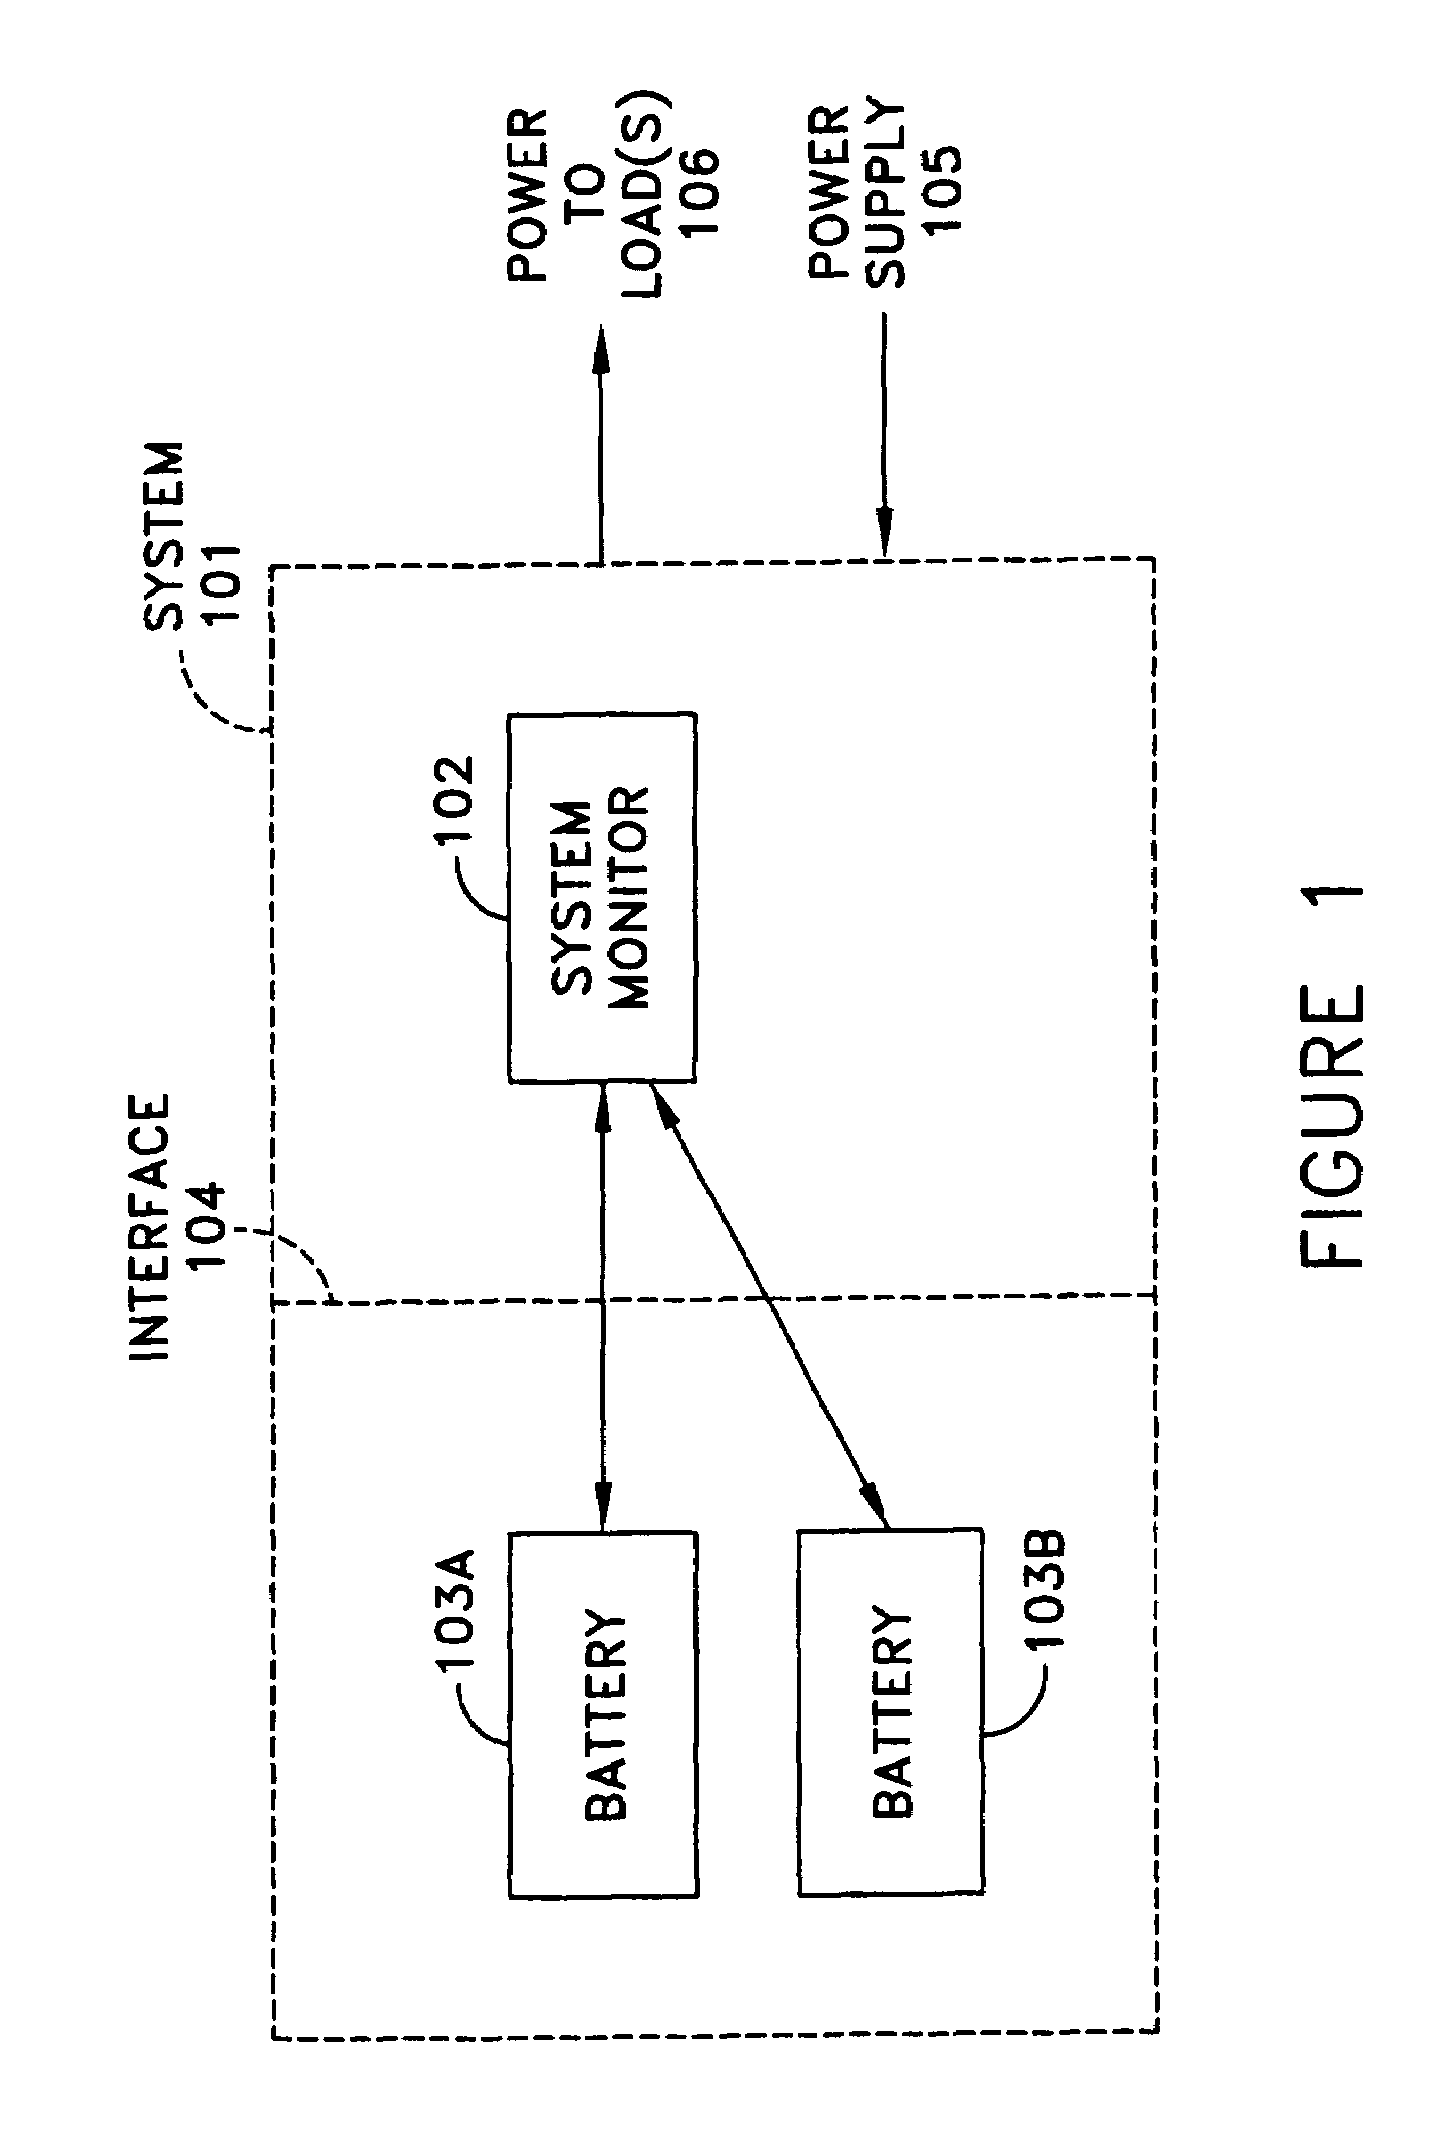 Method and apparatus for monitoring energy storage devices